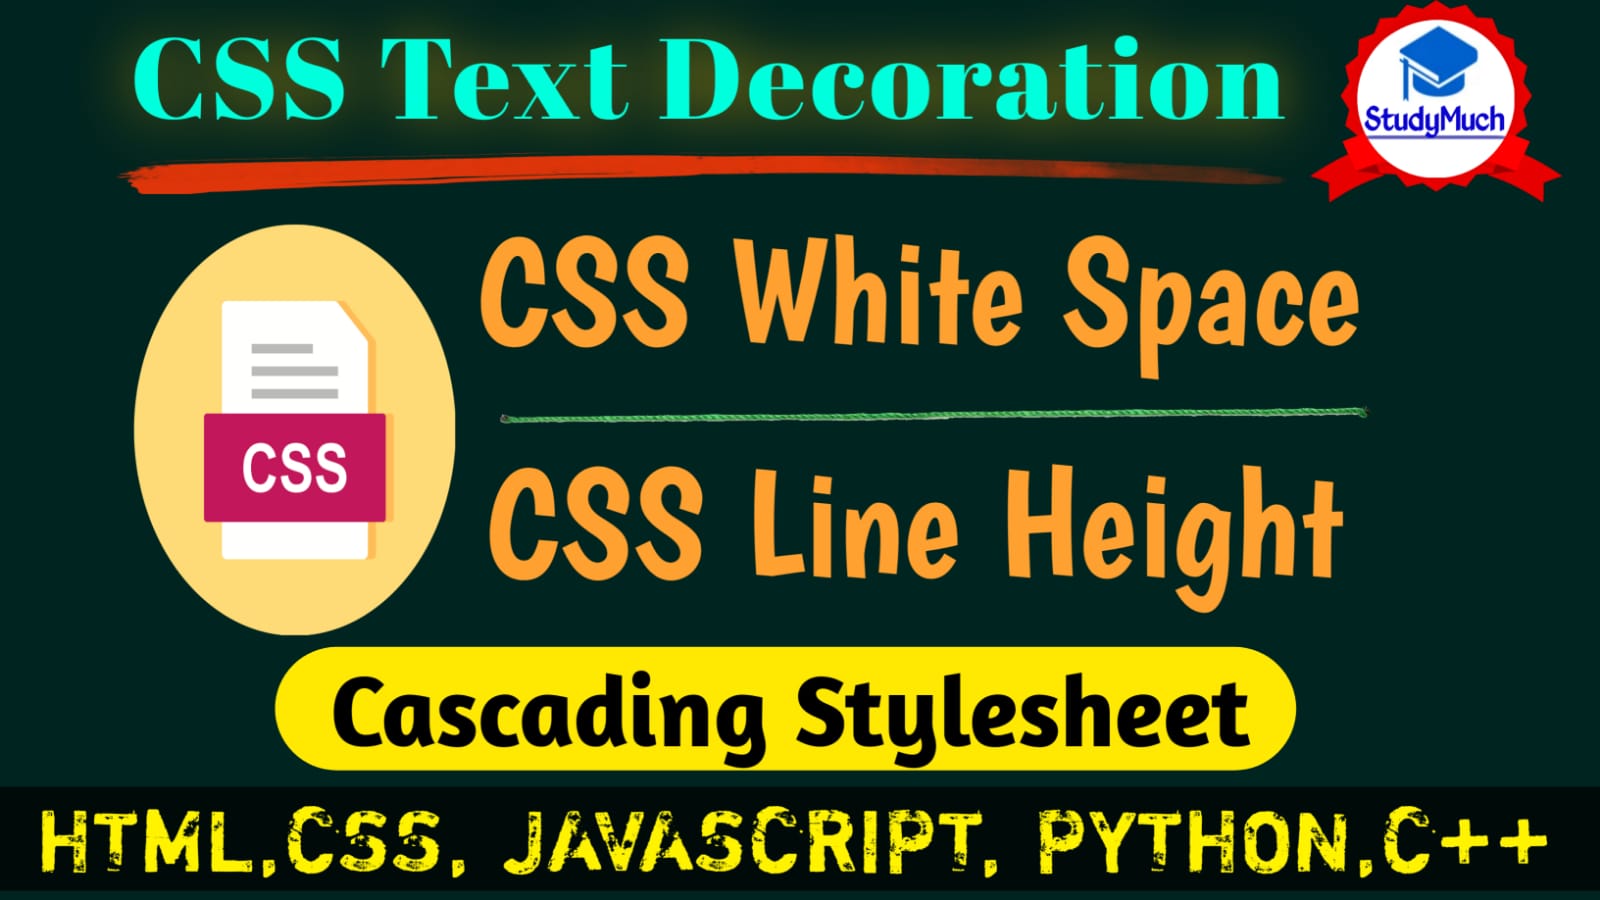 CSS White Space StudyMuch